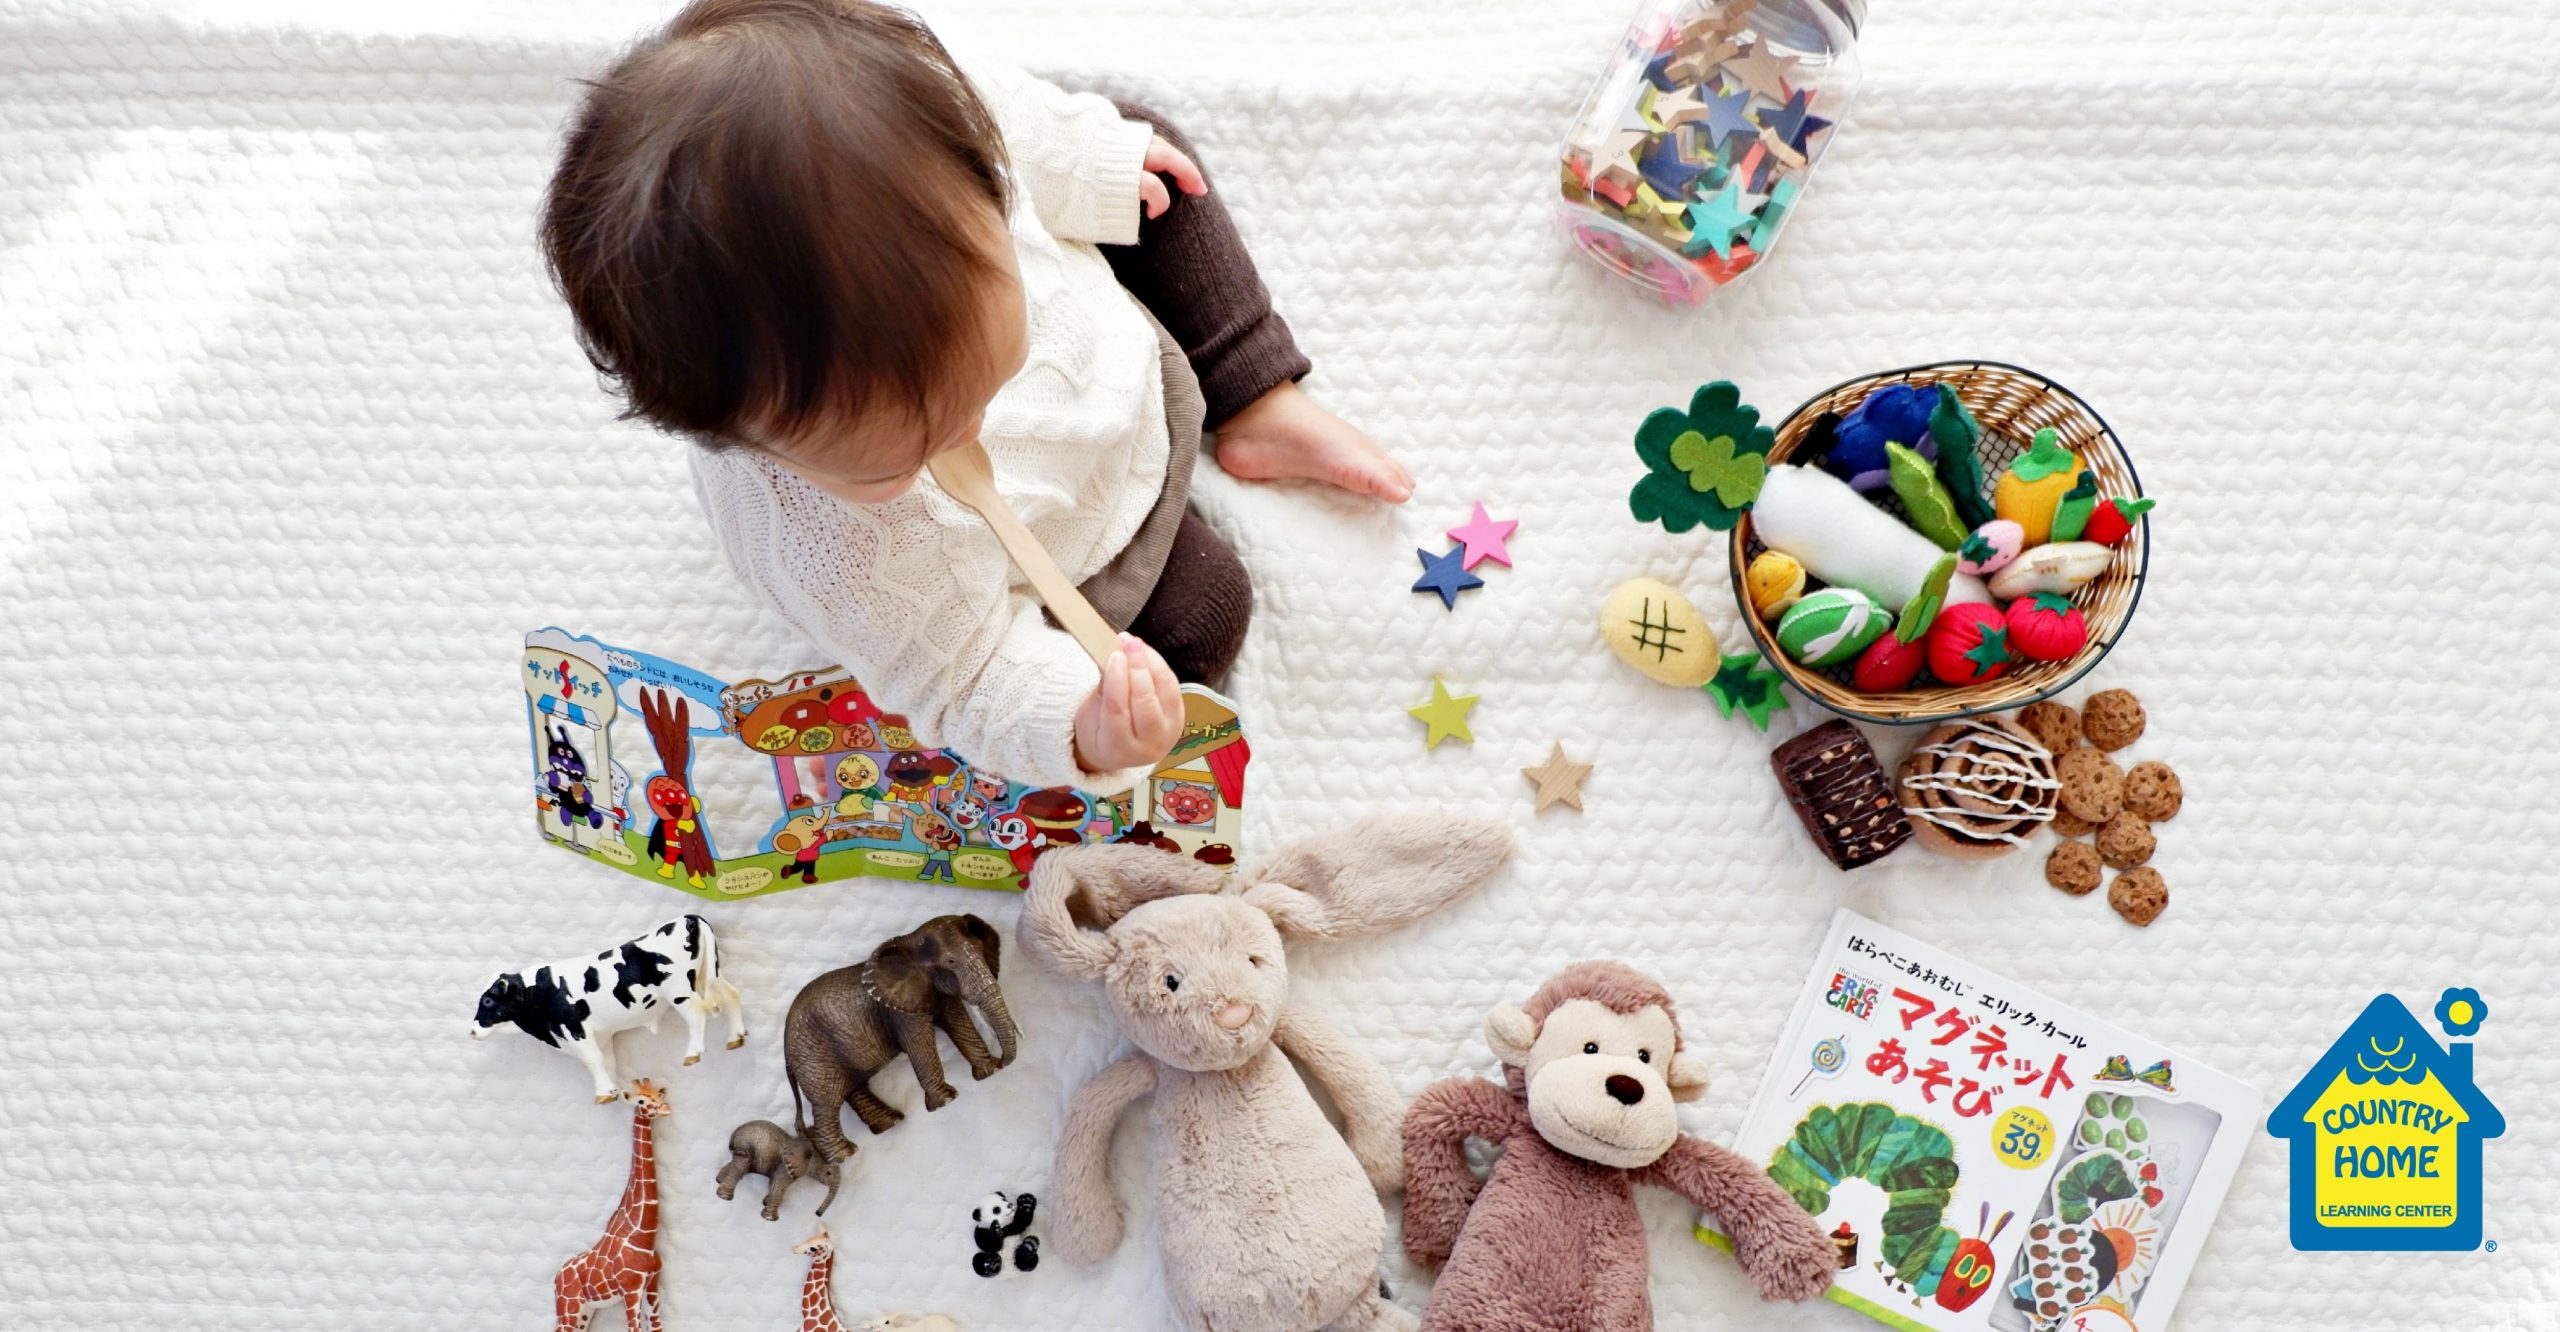 Tips for Toddler Independent Play